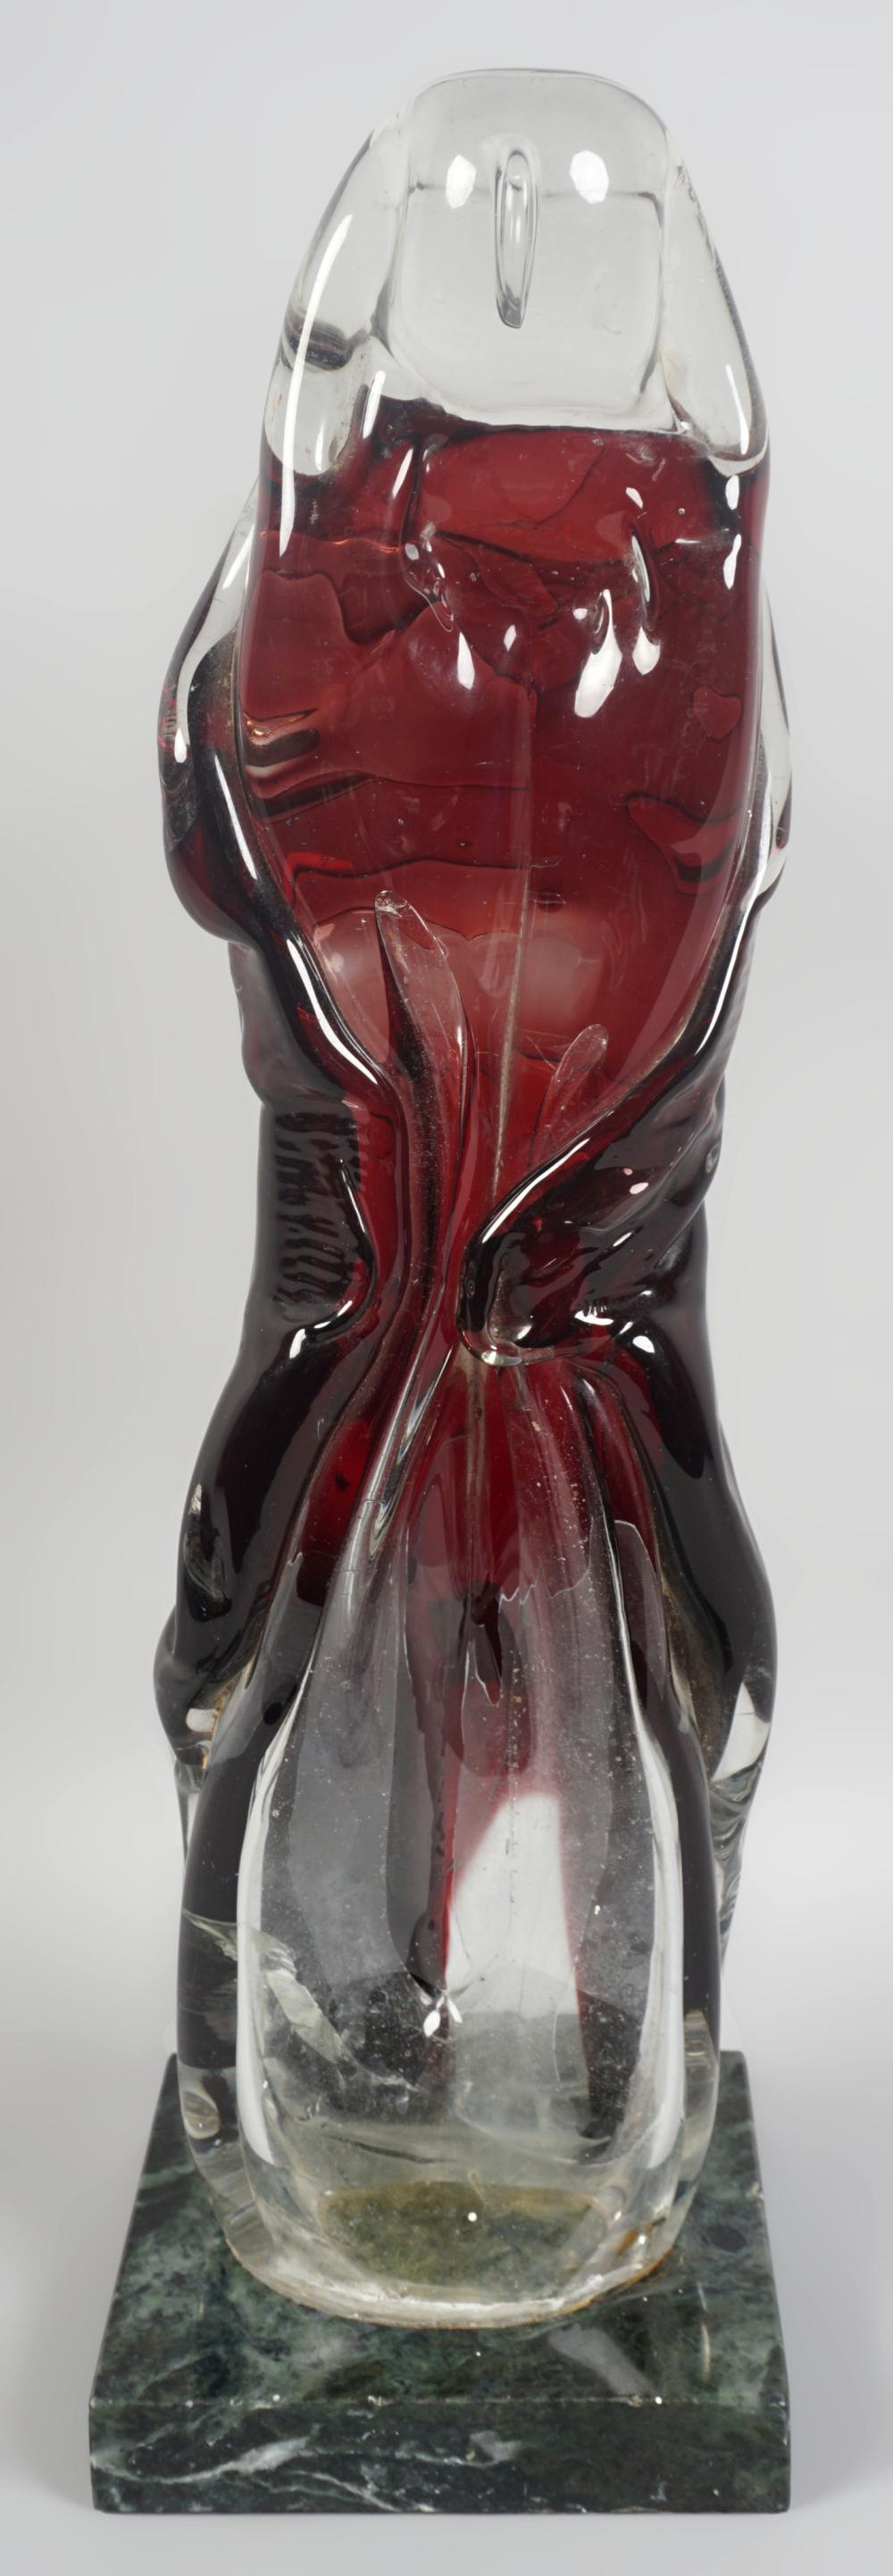 RED AND CLEAR GLASS STYLIZED FIGURE 33cc8c